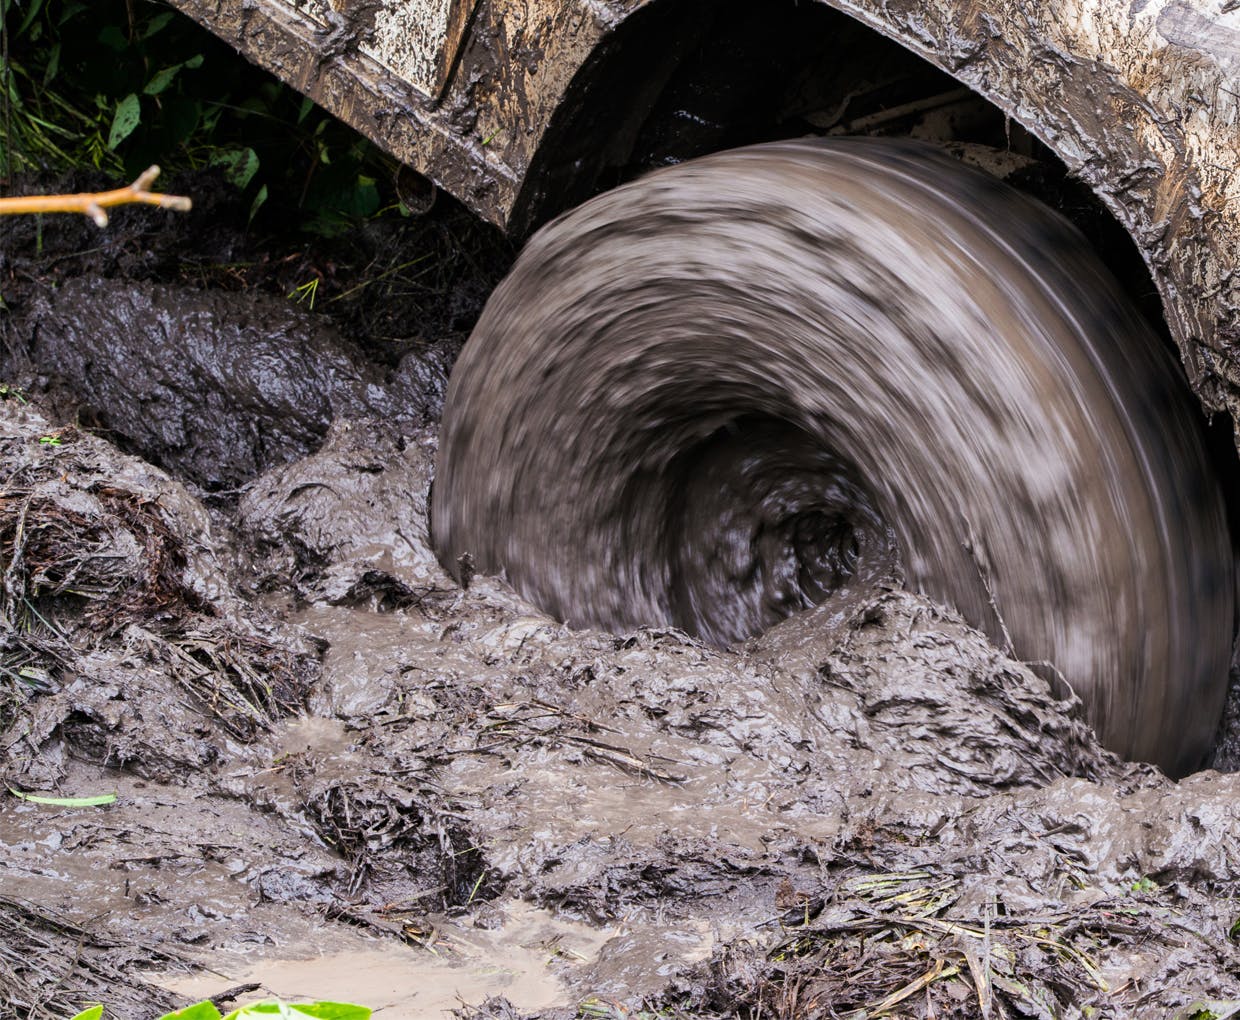 Consumer confidence 'stuck in the mud' – Marketing Week